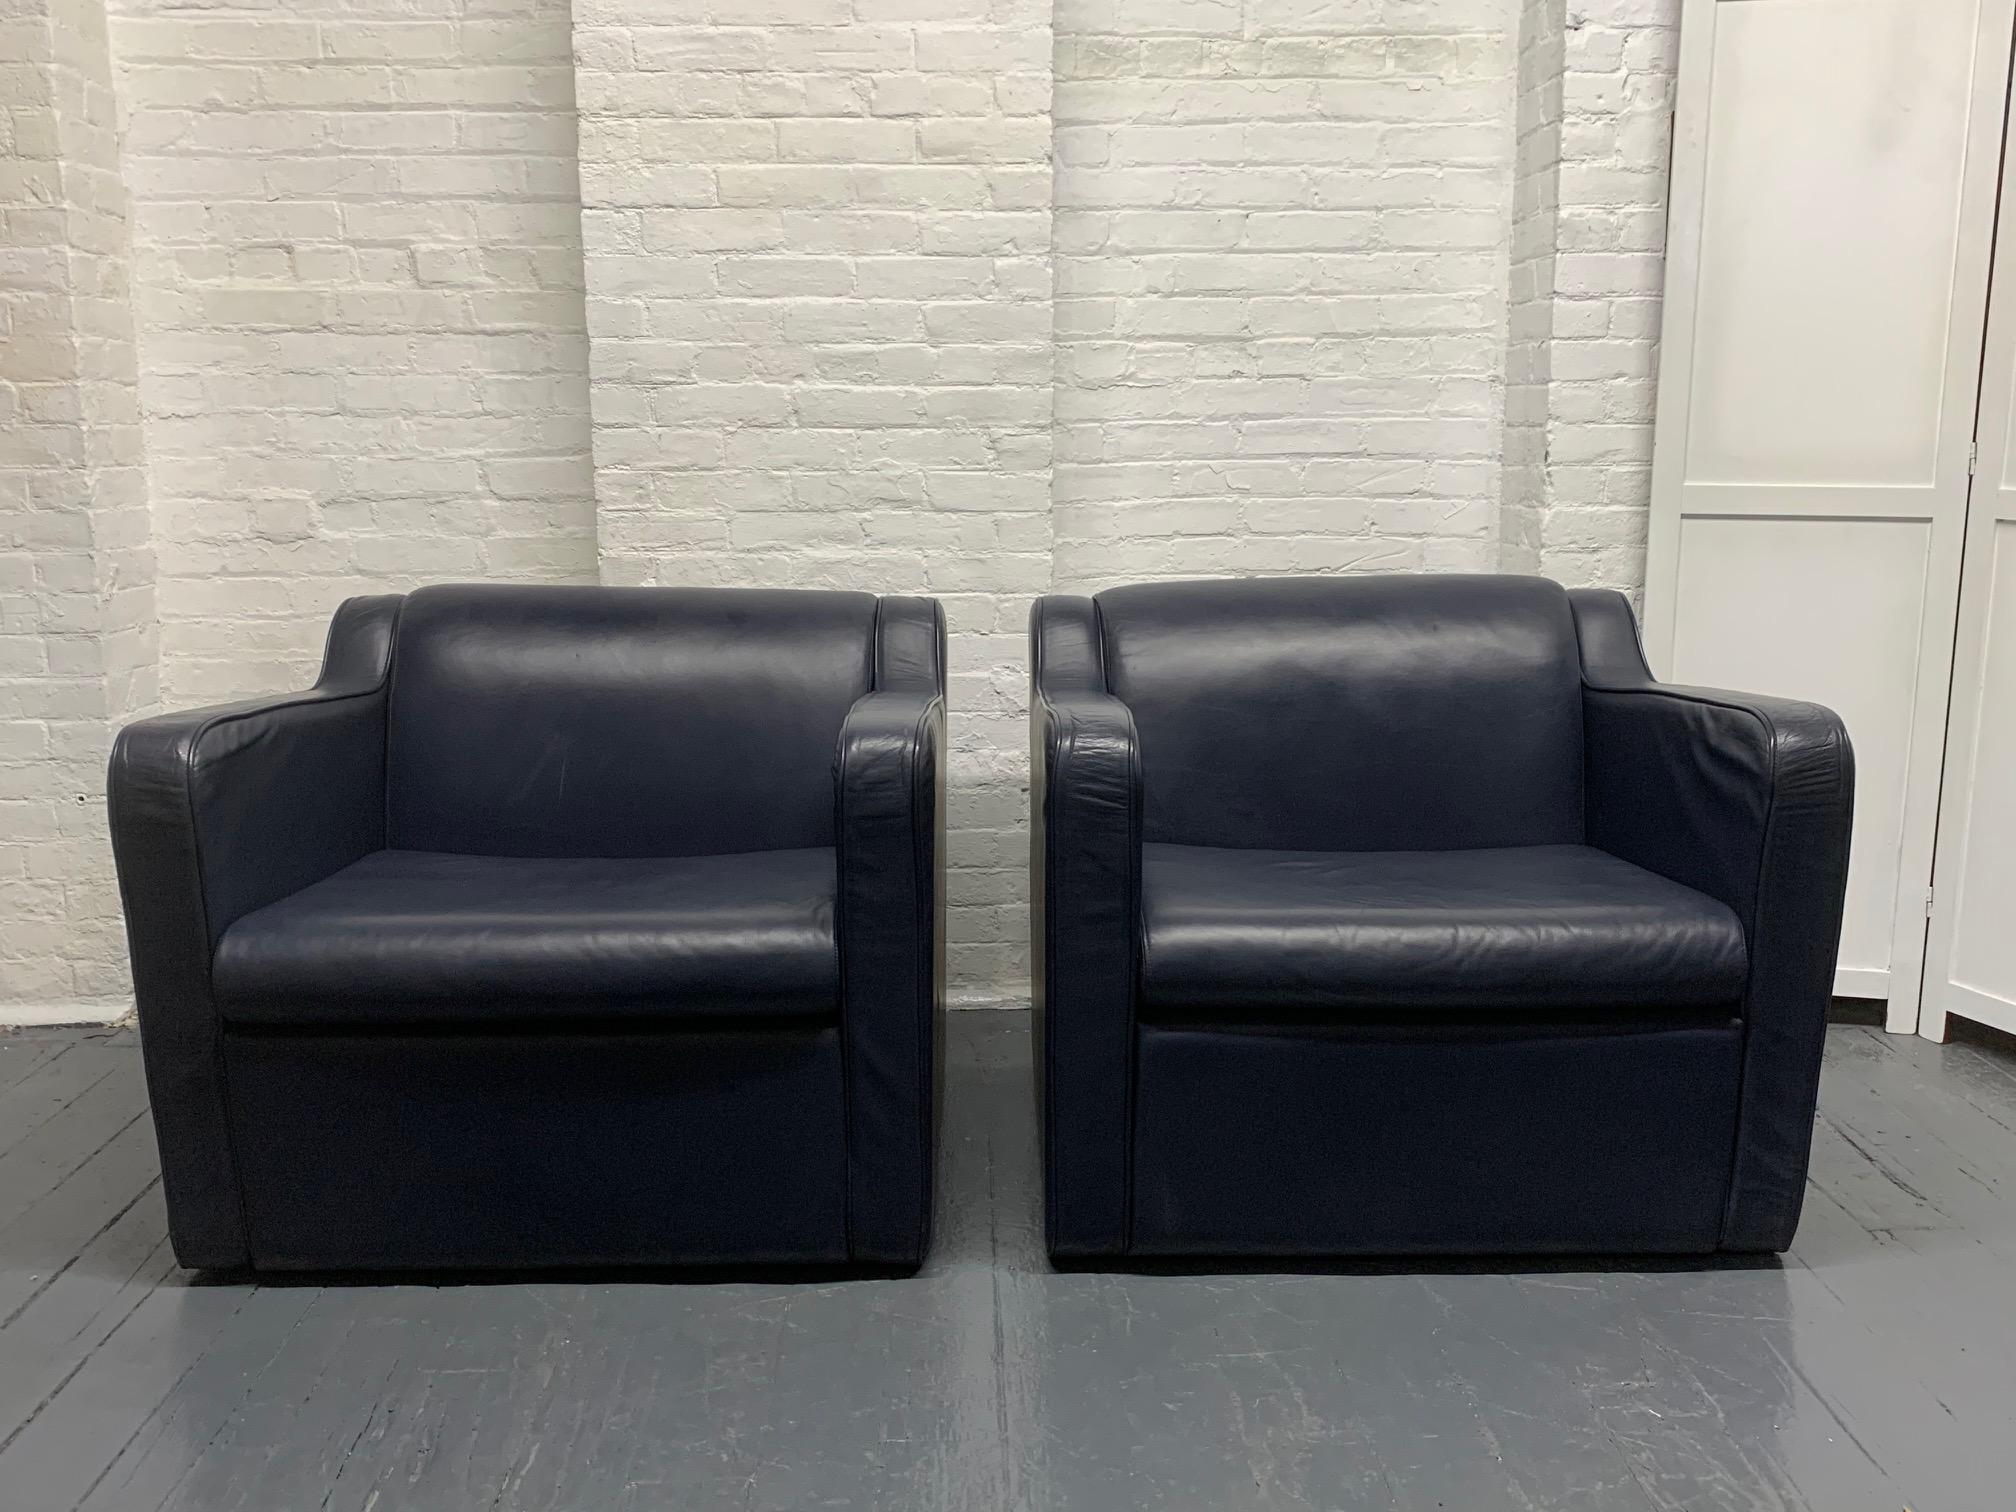 Pair of leather (speed) lounge chairs. The leather is blue. Style of Paul Frankl speed chair.